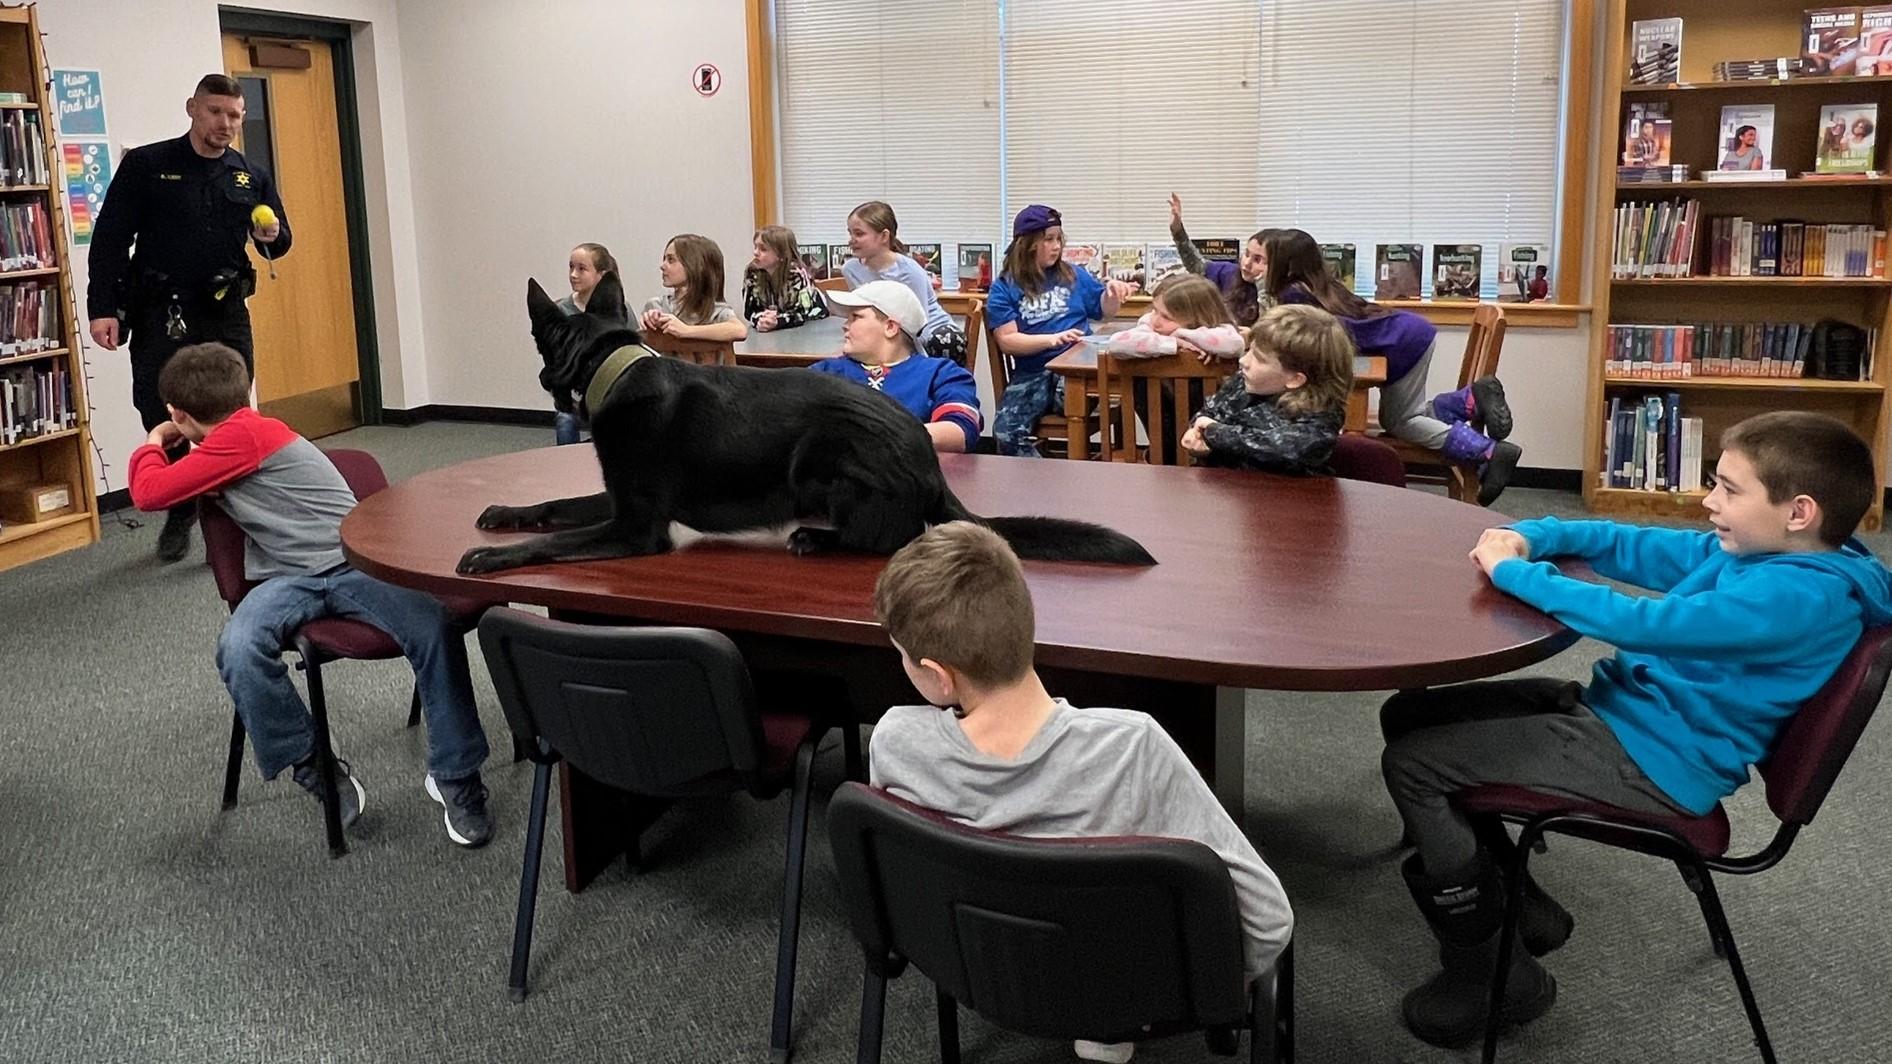 Officer Lent and K9 Knowlton demonstrate work to students in library